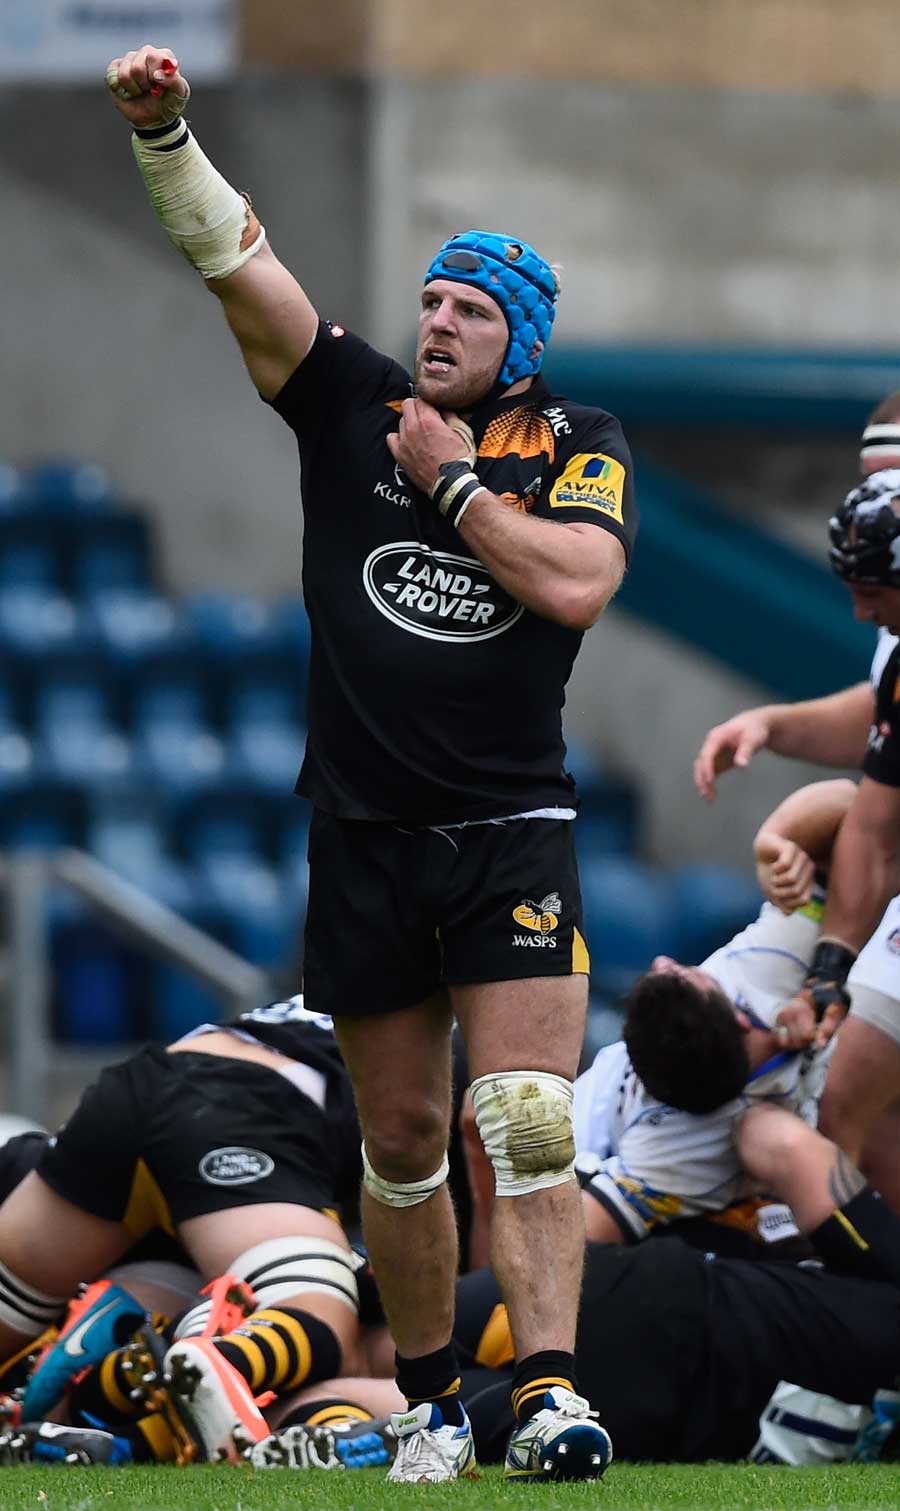 Wasps' James Haskell celebrates their win over Bath